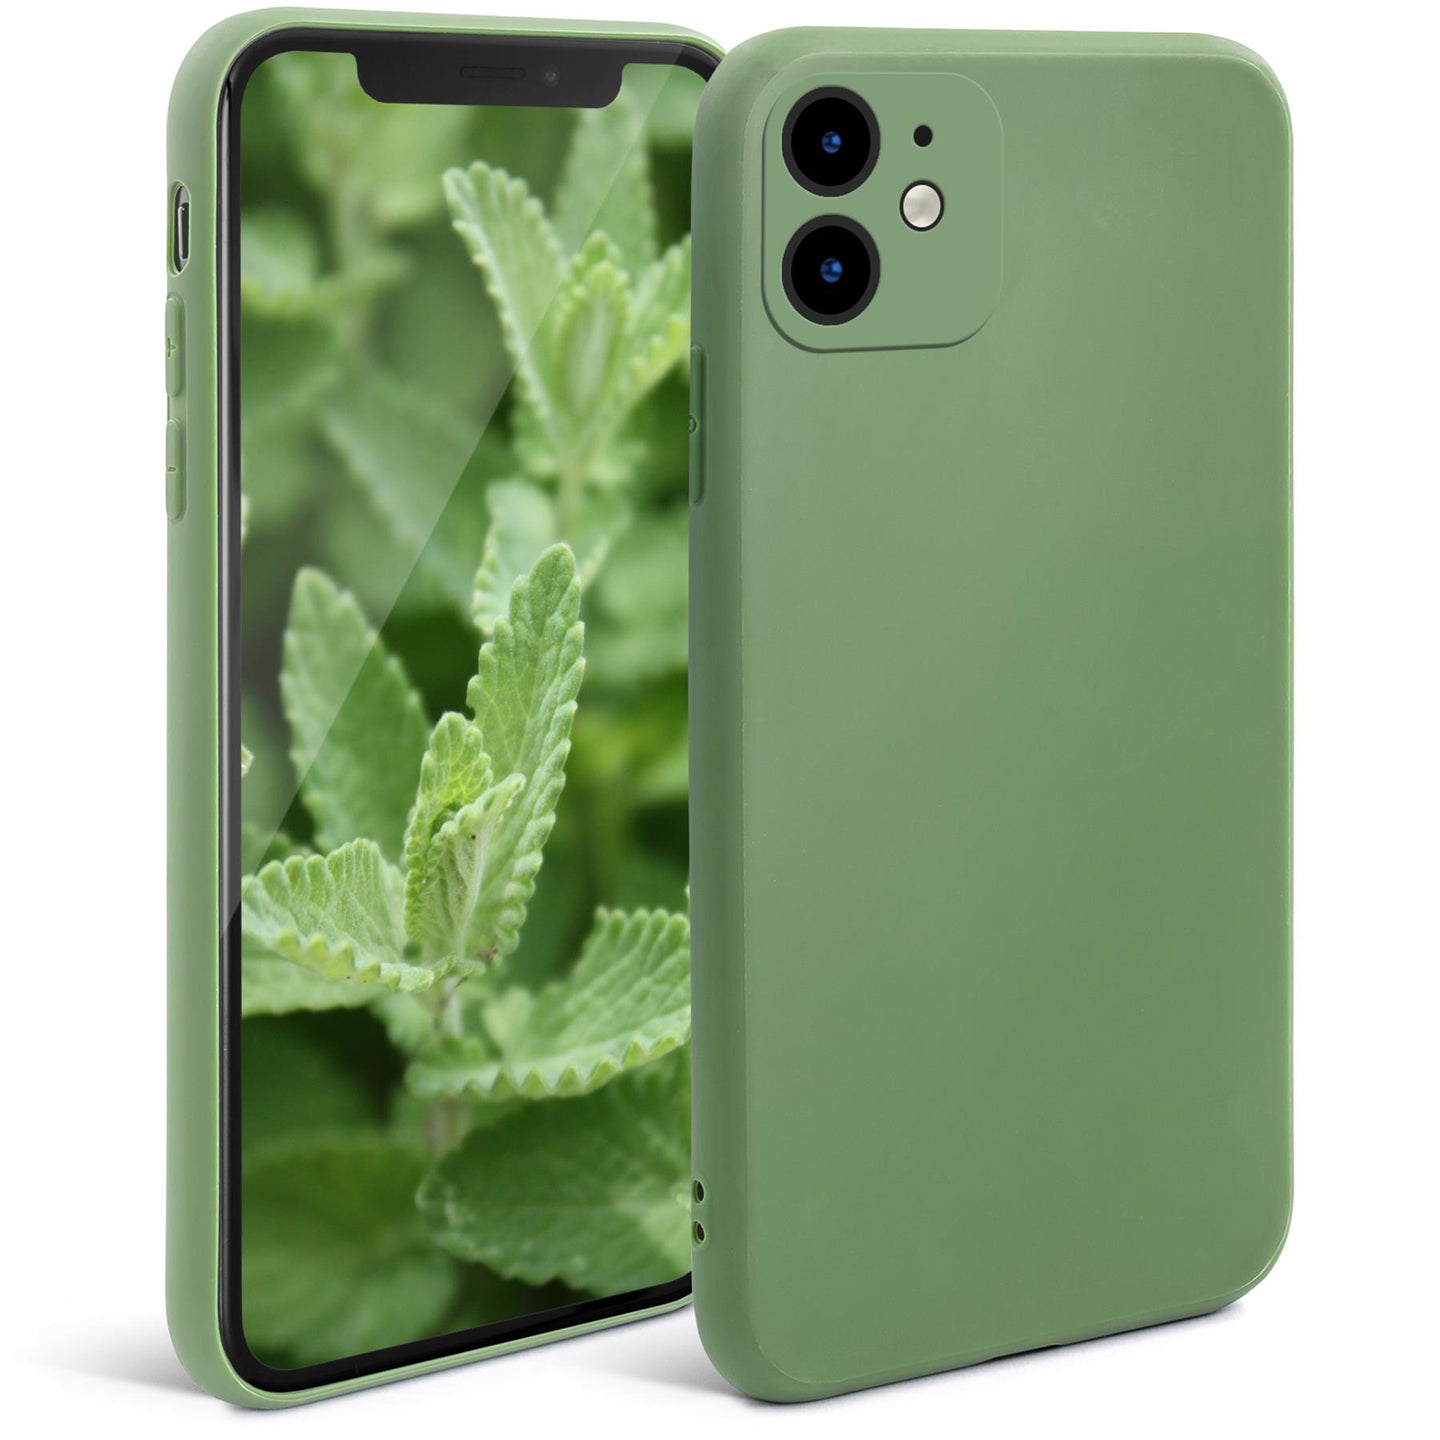 Moozy Minimalist Series Silicone Case for iPhone 11, Mint green - Matte Finish Lightweight Mobile Phone Case Ultra Slim Soft Protective TPU Cover with Matte Surface